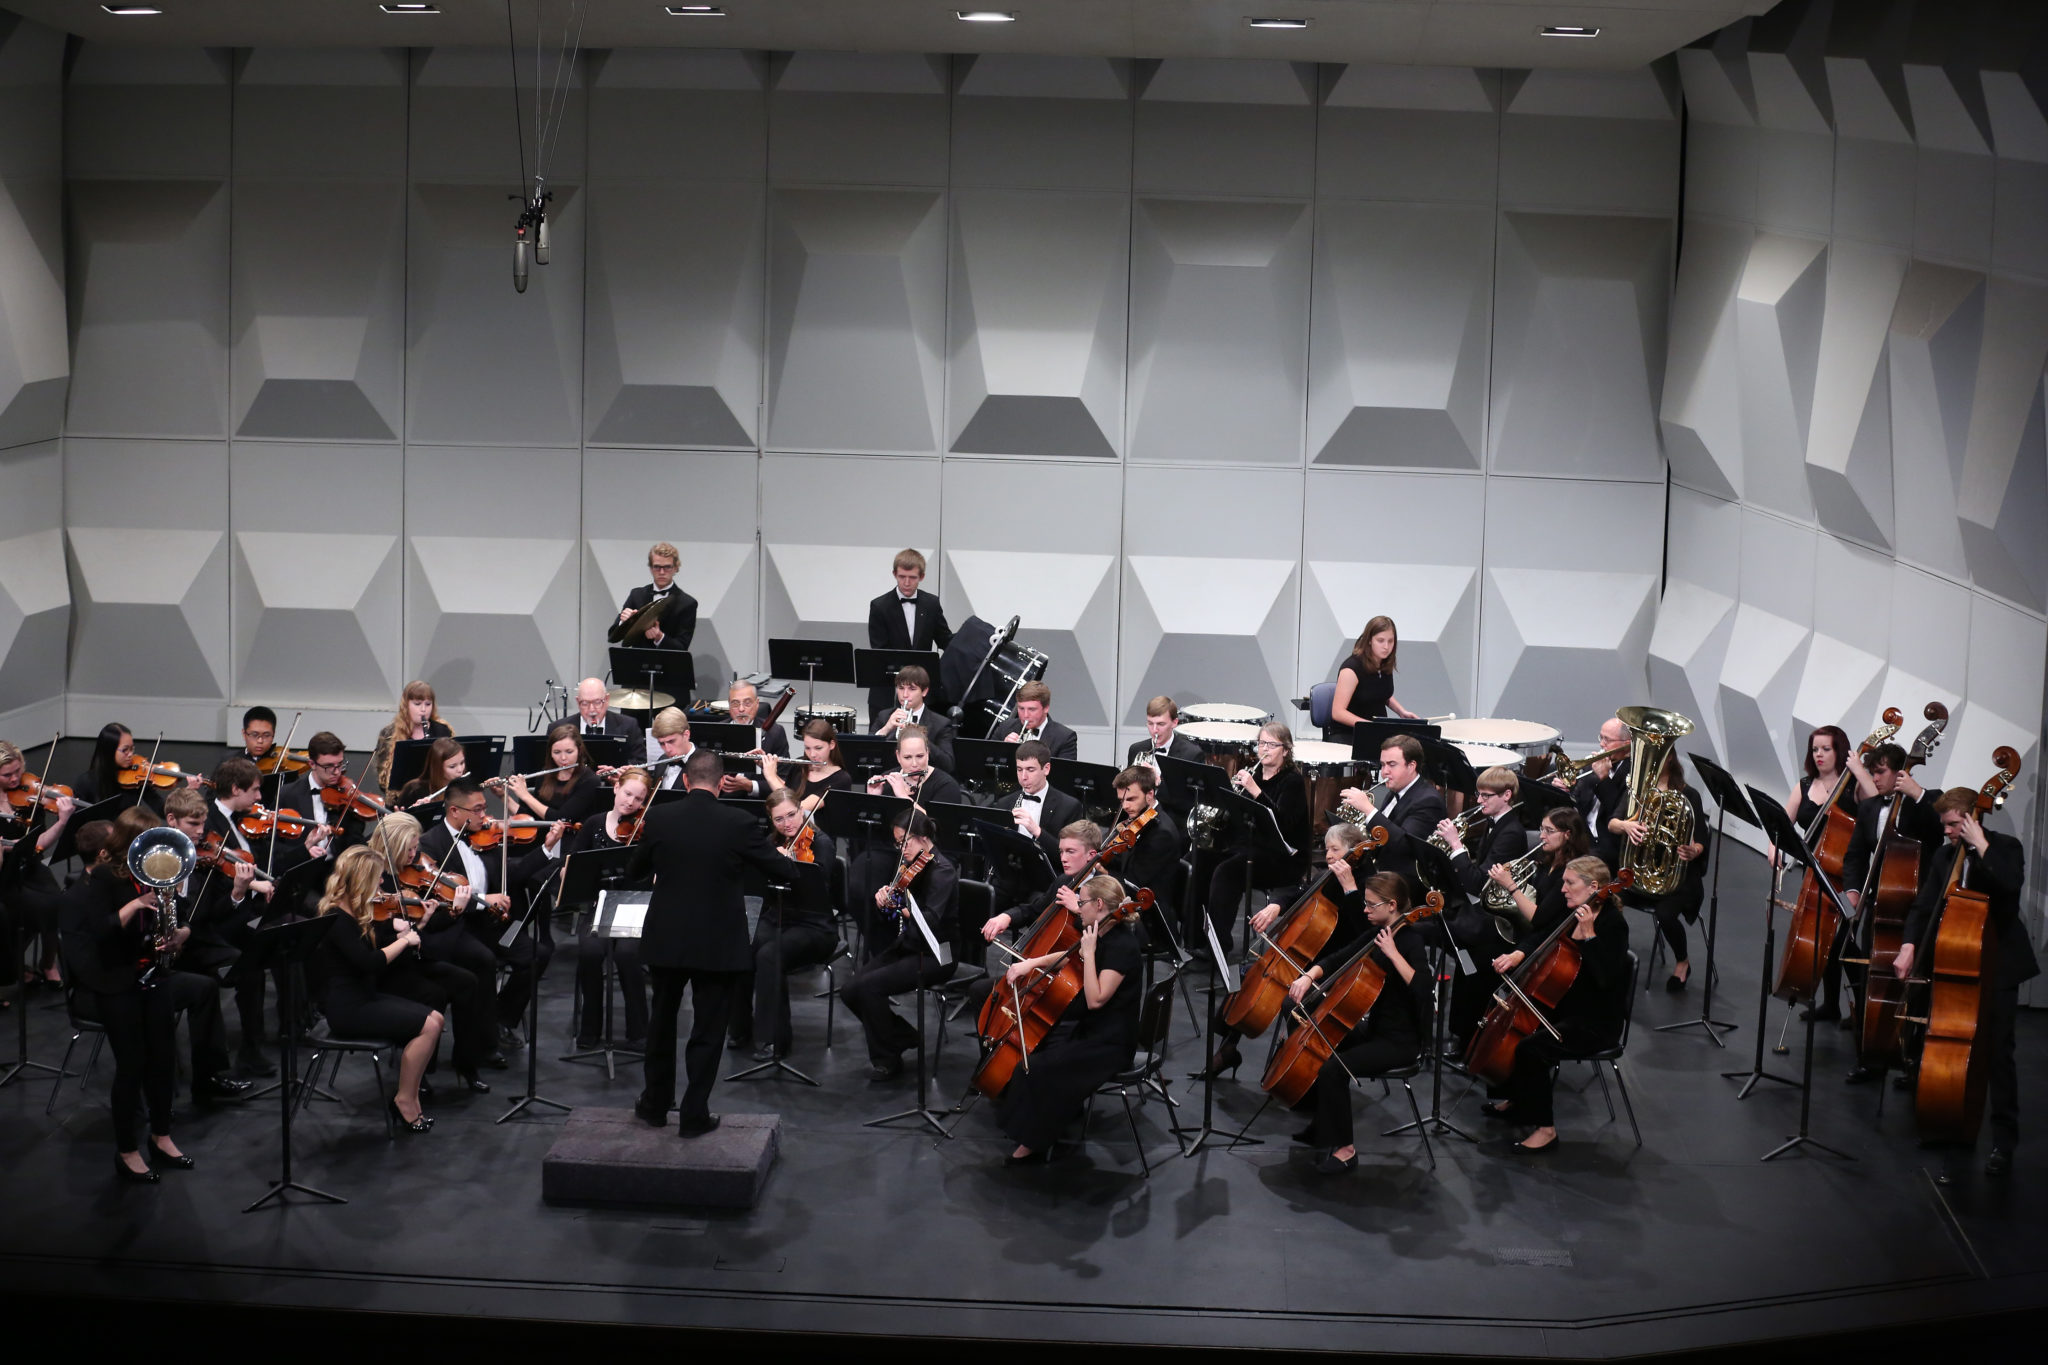 Missouri S&T – News and Events – Hear Christmas songs and fireworks at Missouri S&T’s orchestra ...